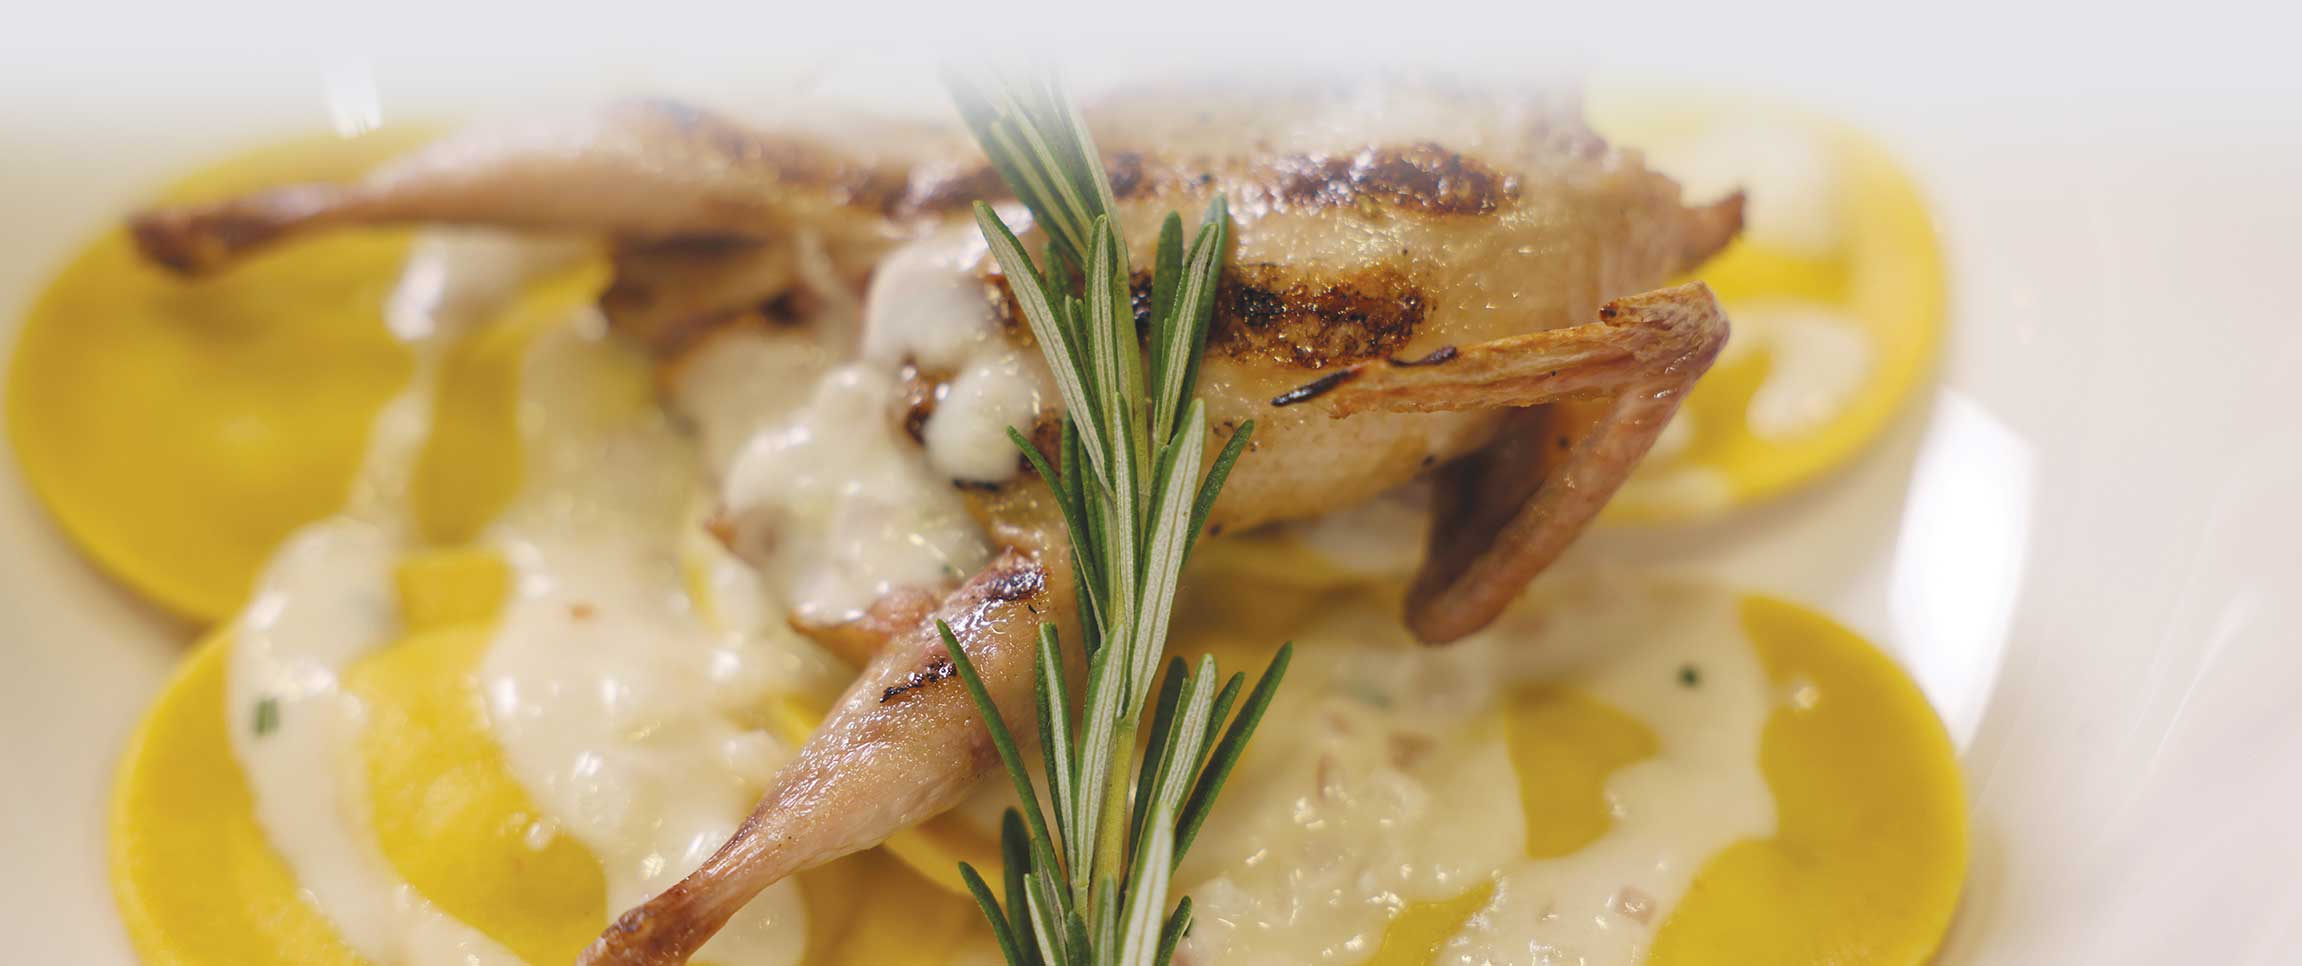 Grilled Quail over Butternut Squash Ravioli with a Shallot and Rosemary Alfredo